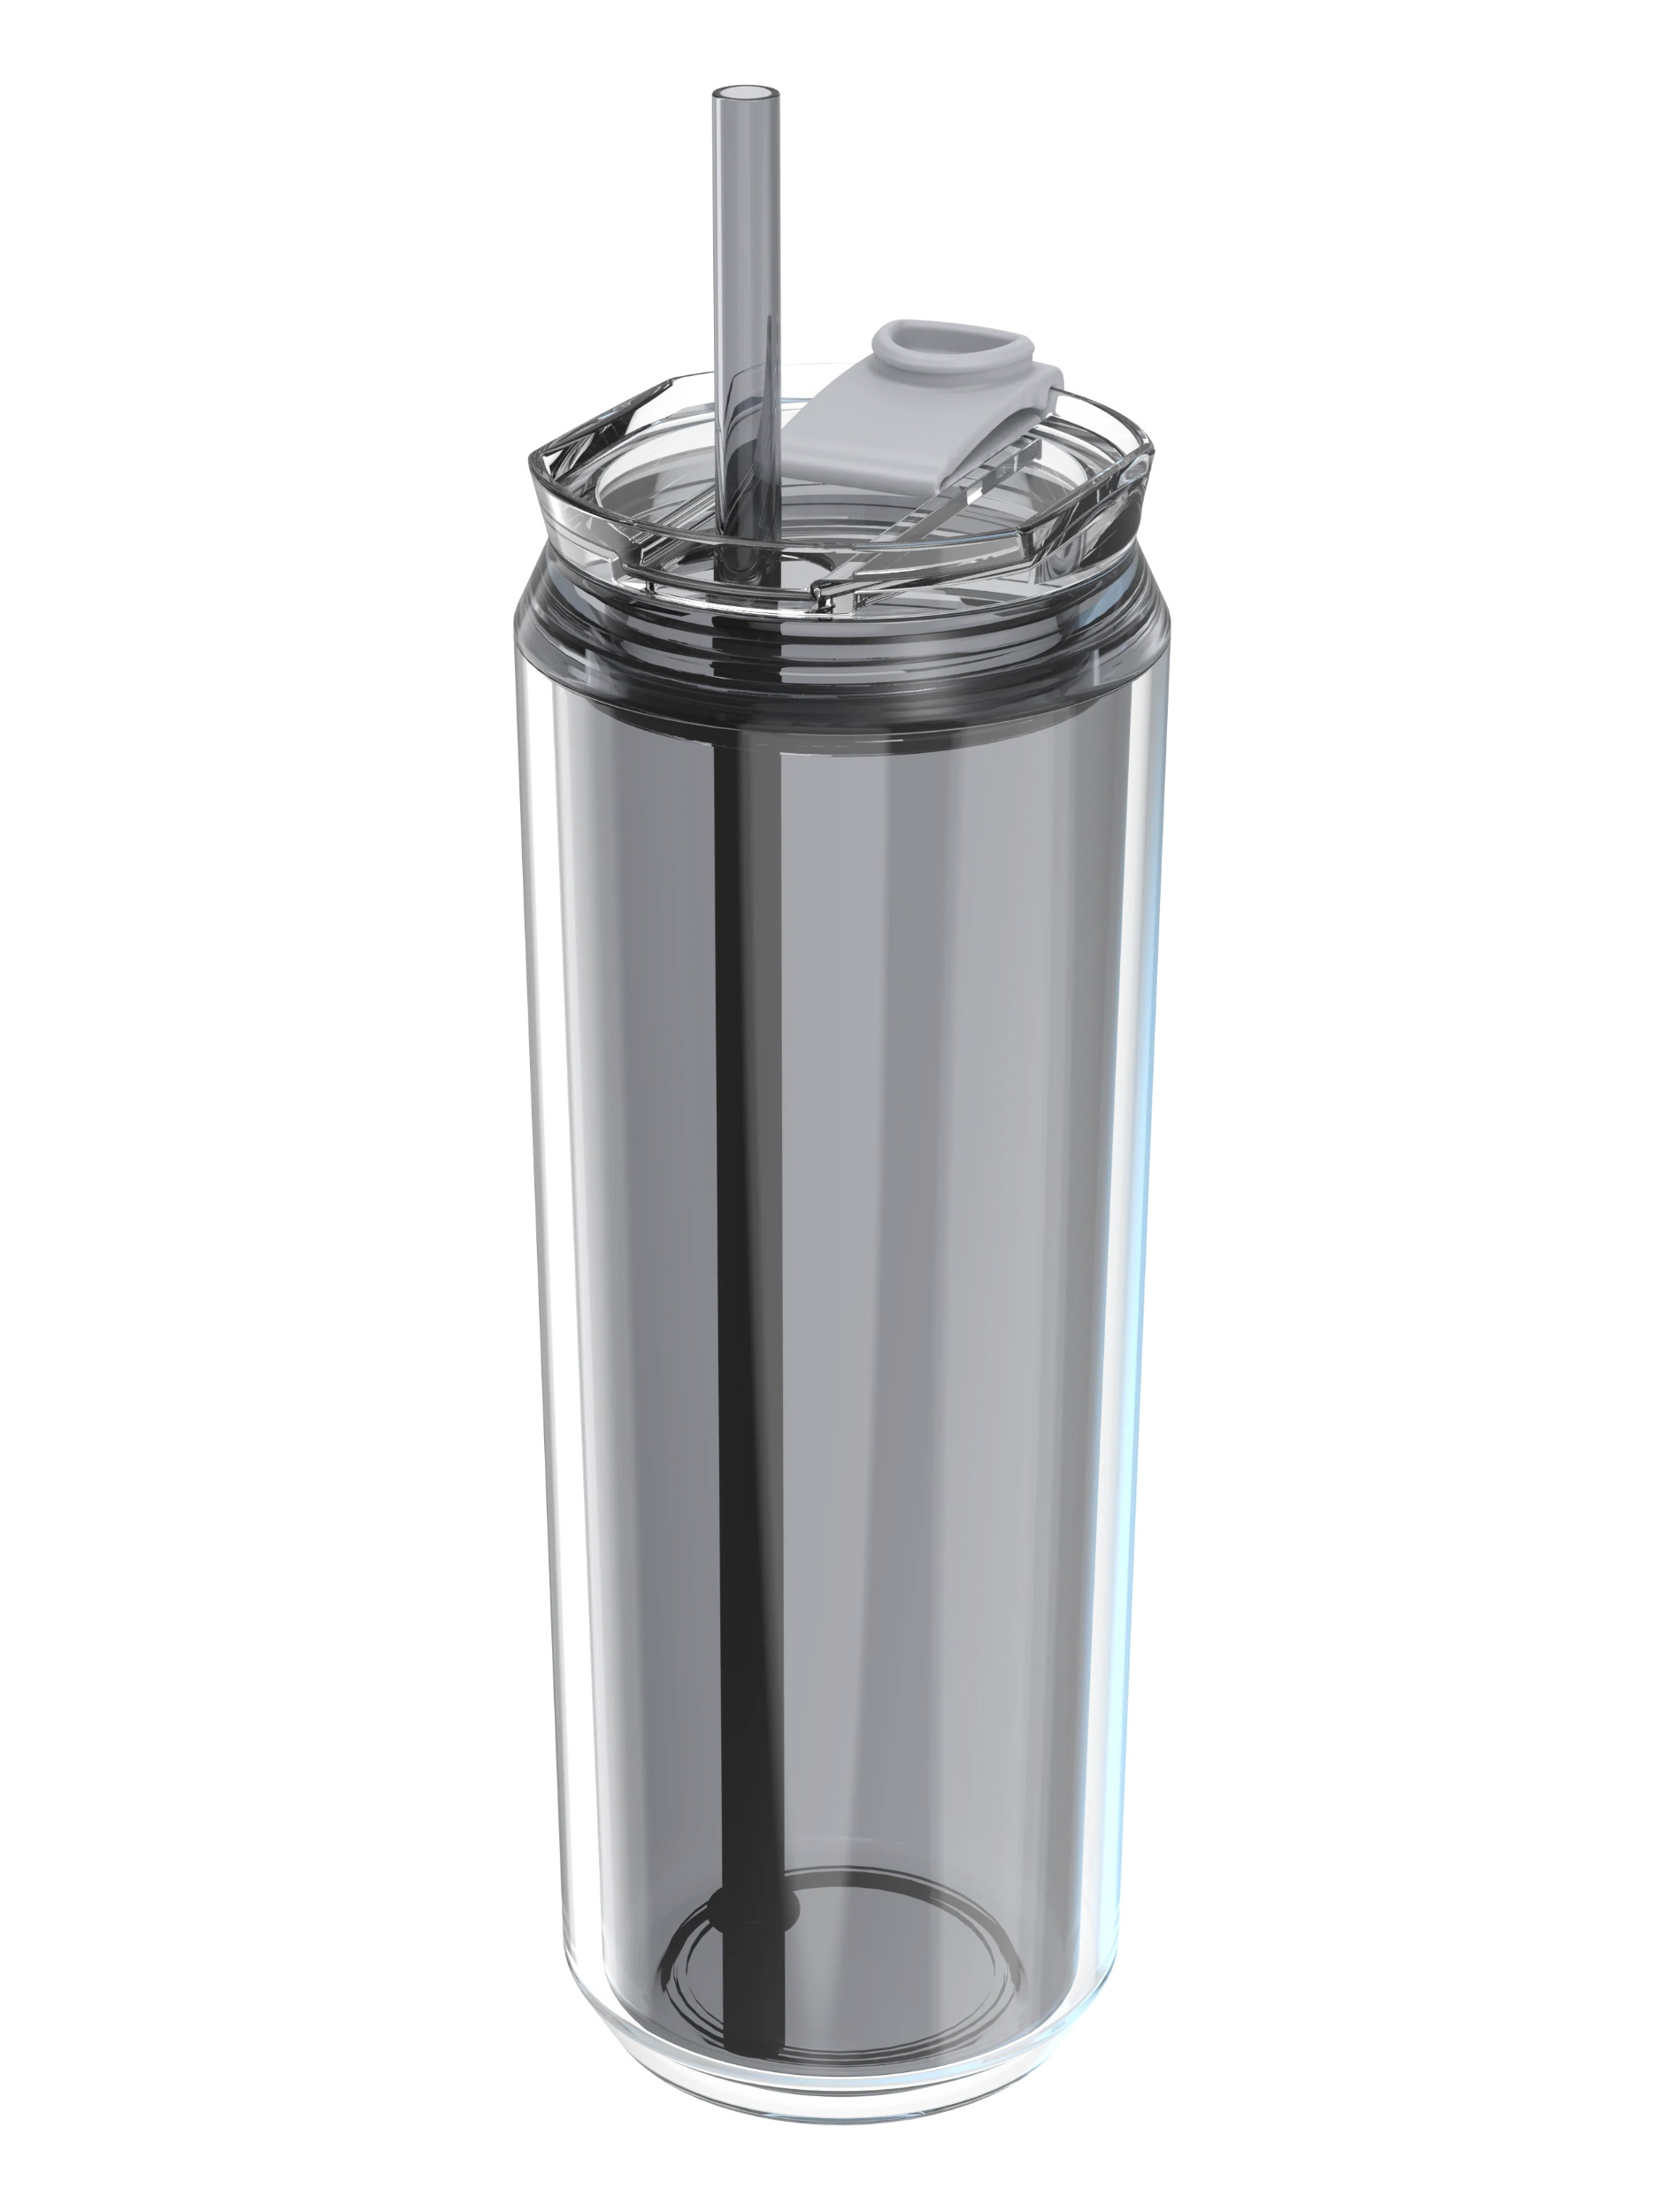 Cool Gear 3-Pack Modern Tumbler with Reusable Straw | Dishwasher Safe, Cup Holder Friendly, Spillproof, Double-Wall Insulated Travel Tumbler | Solid Variety Pack - image 2 of 4